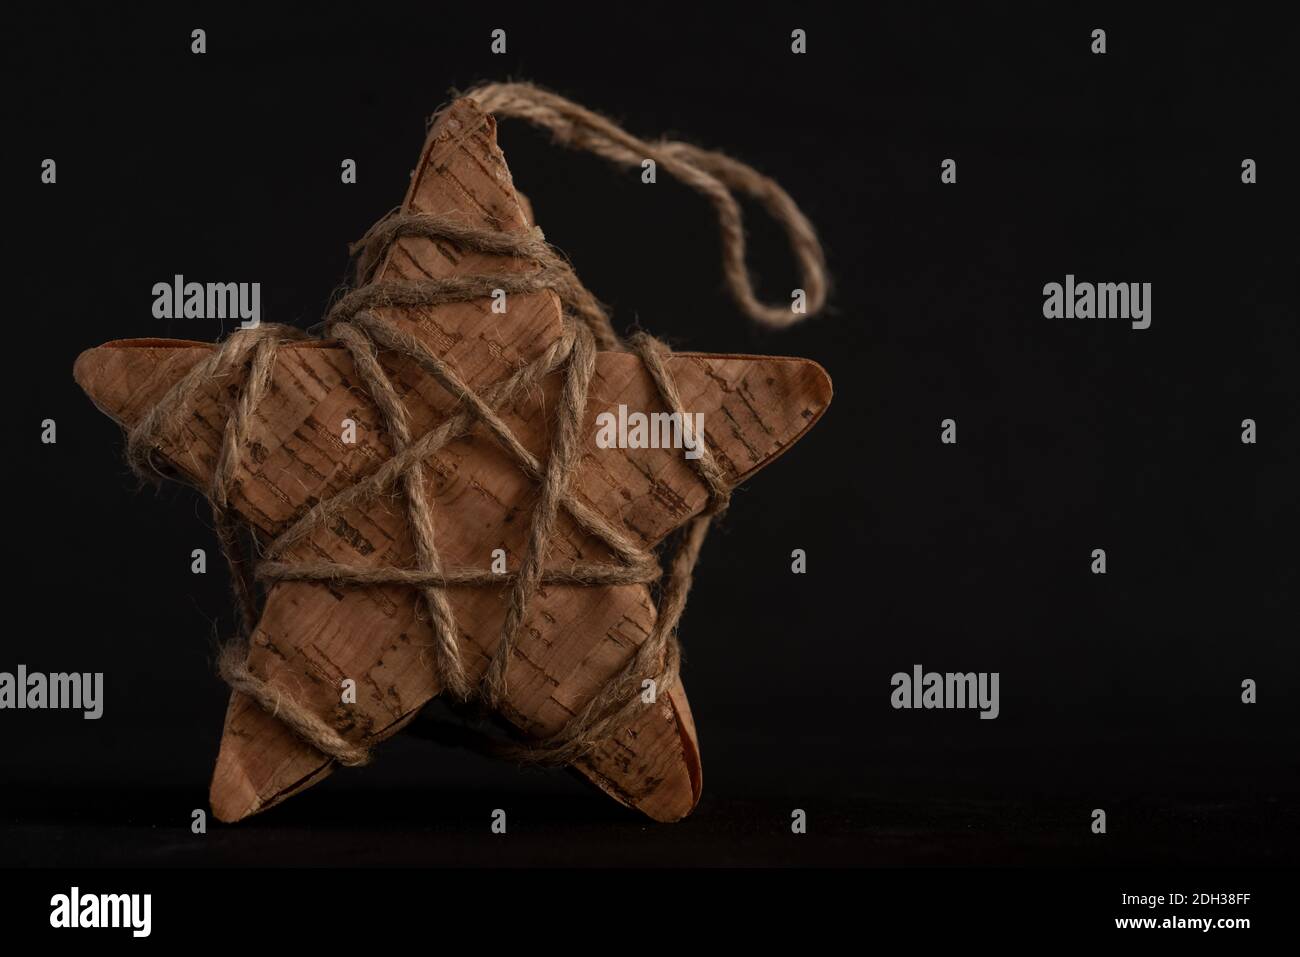 Close up portrait of Homemade Christmas Star on a black background Stock Photo